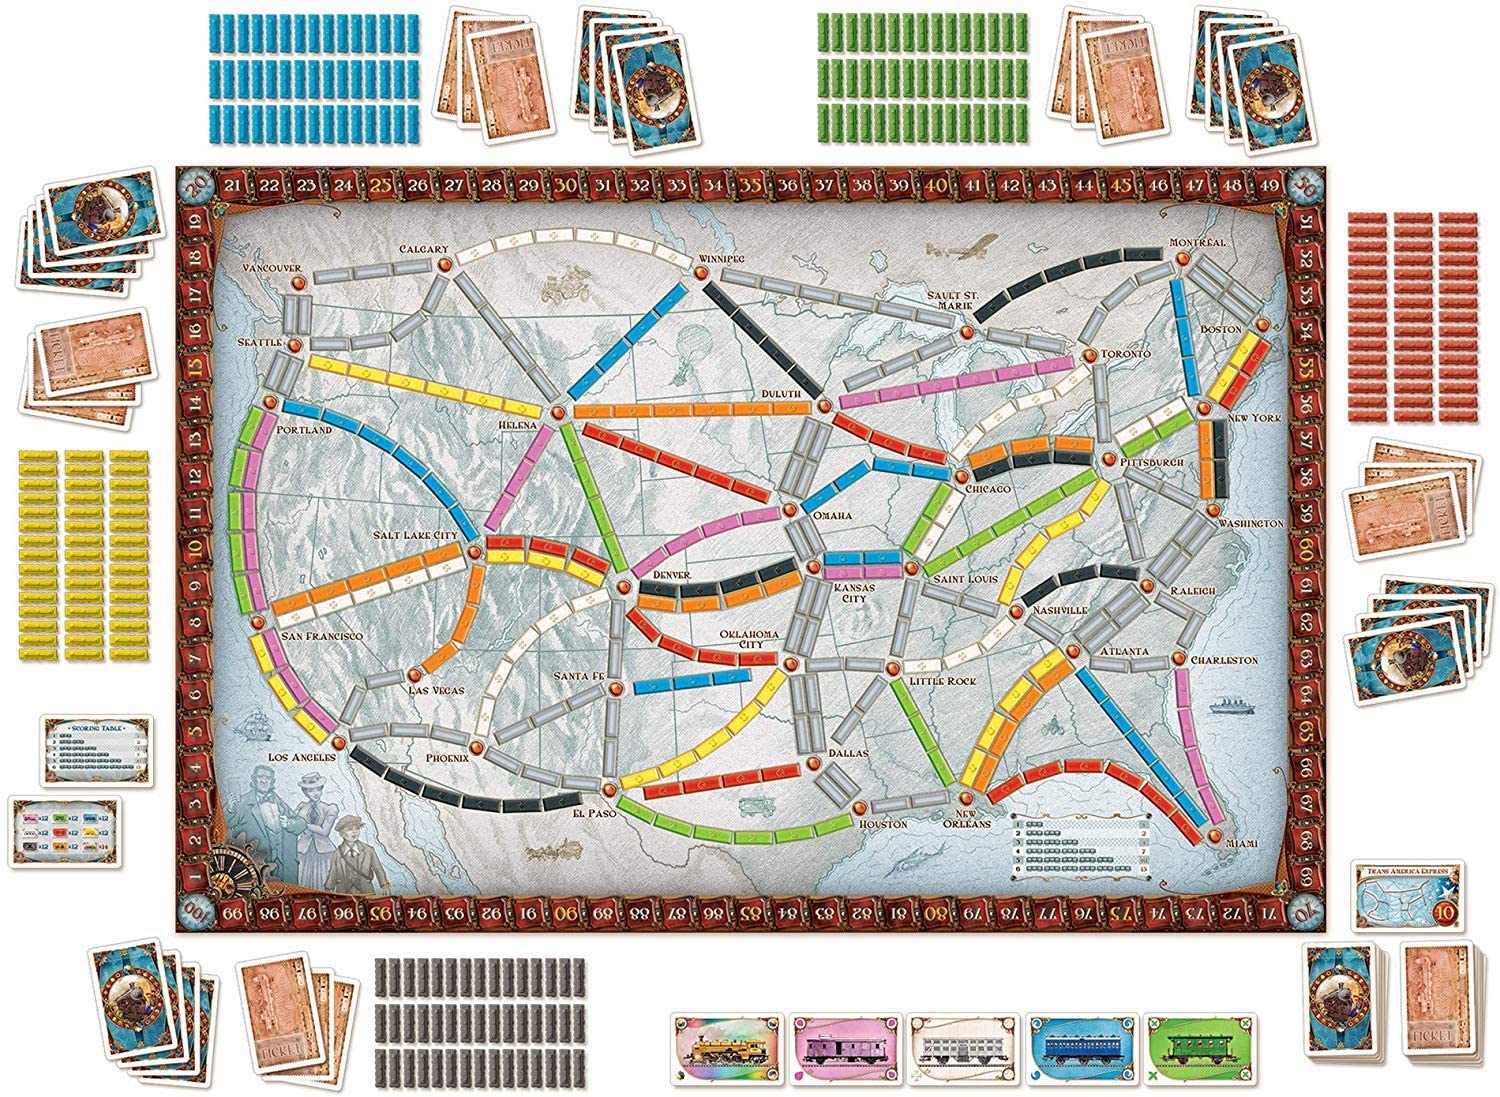 How to play Ticket to Ride